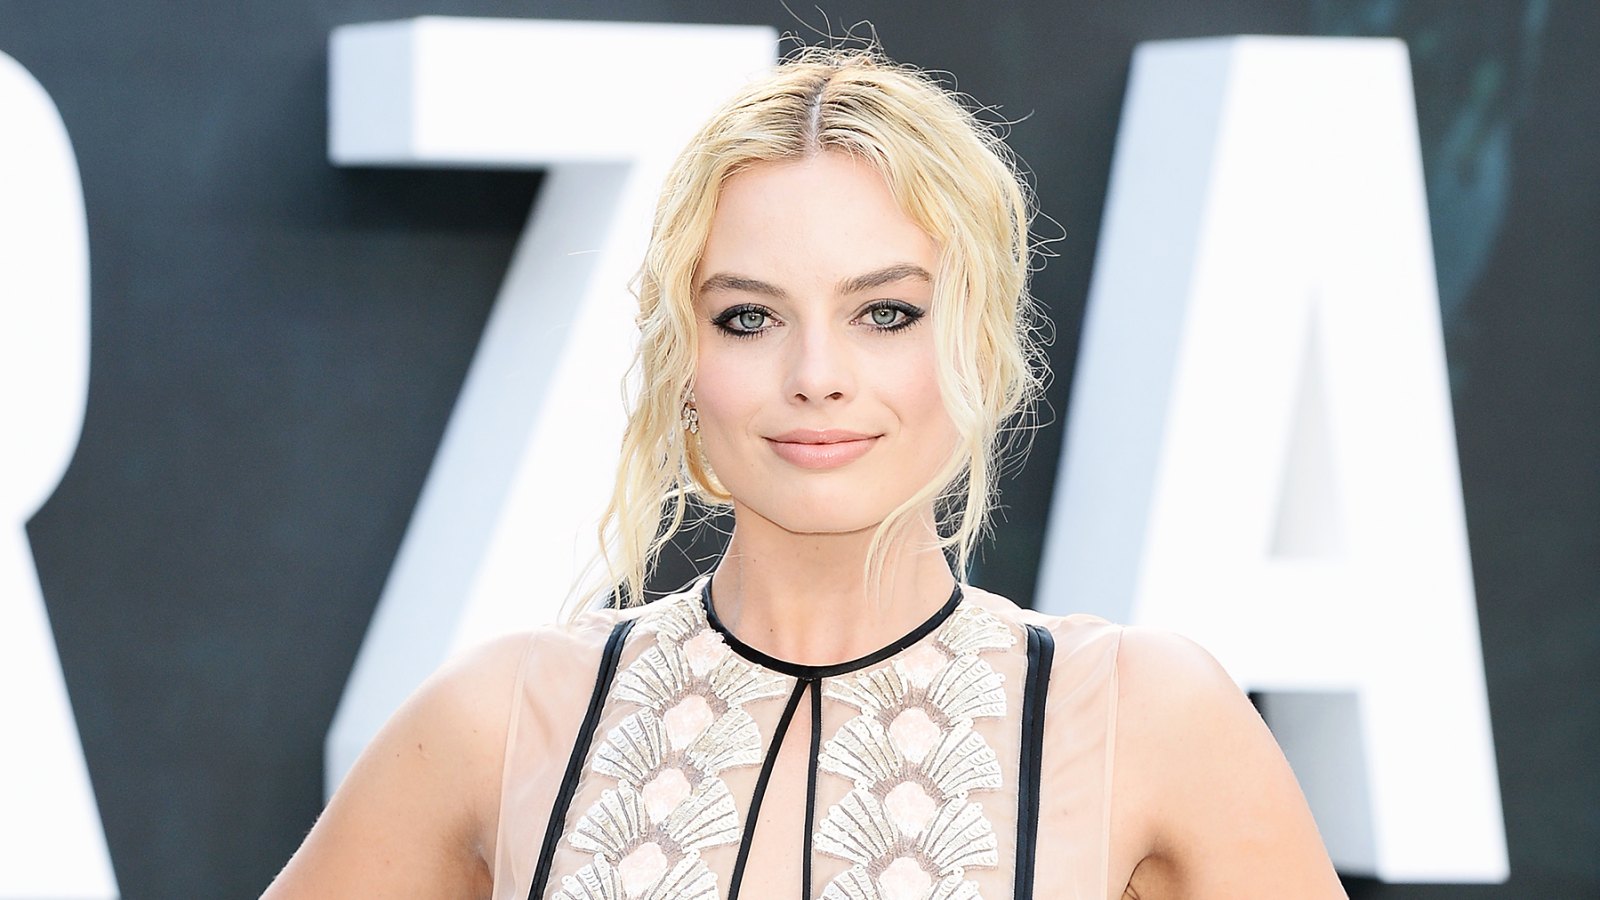 Margot Robbie Once Found a Severed Human Foot on the Beach